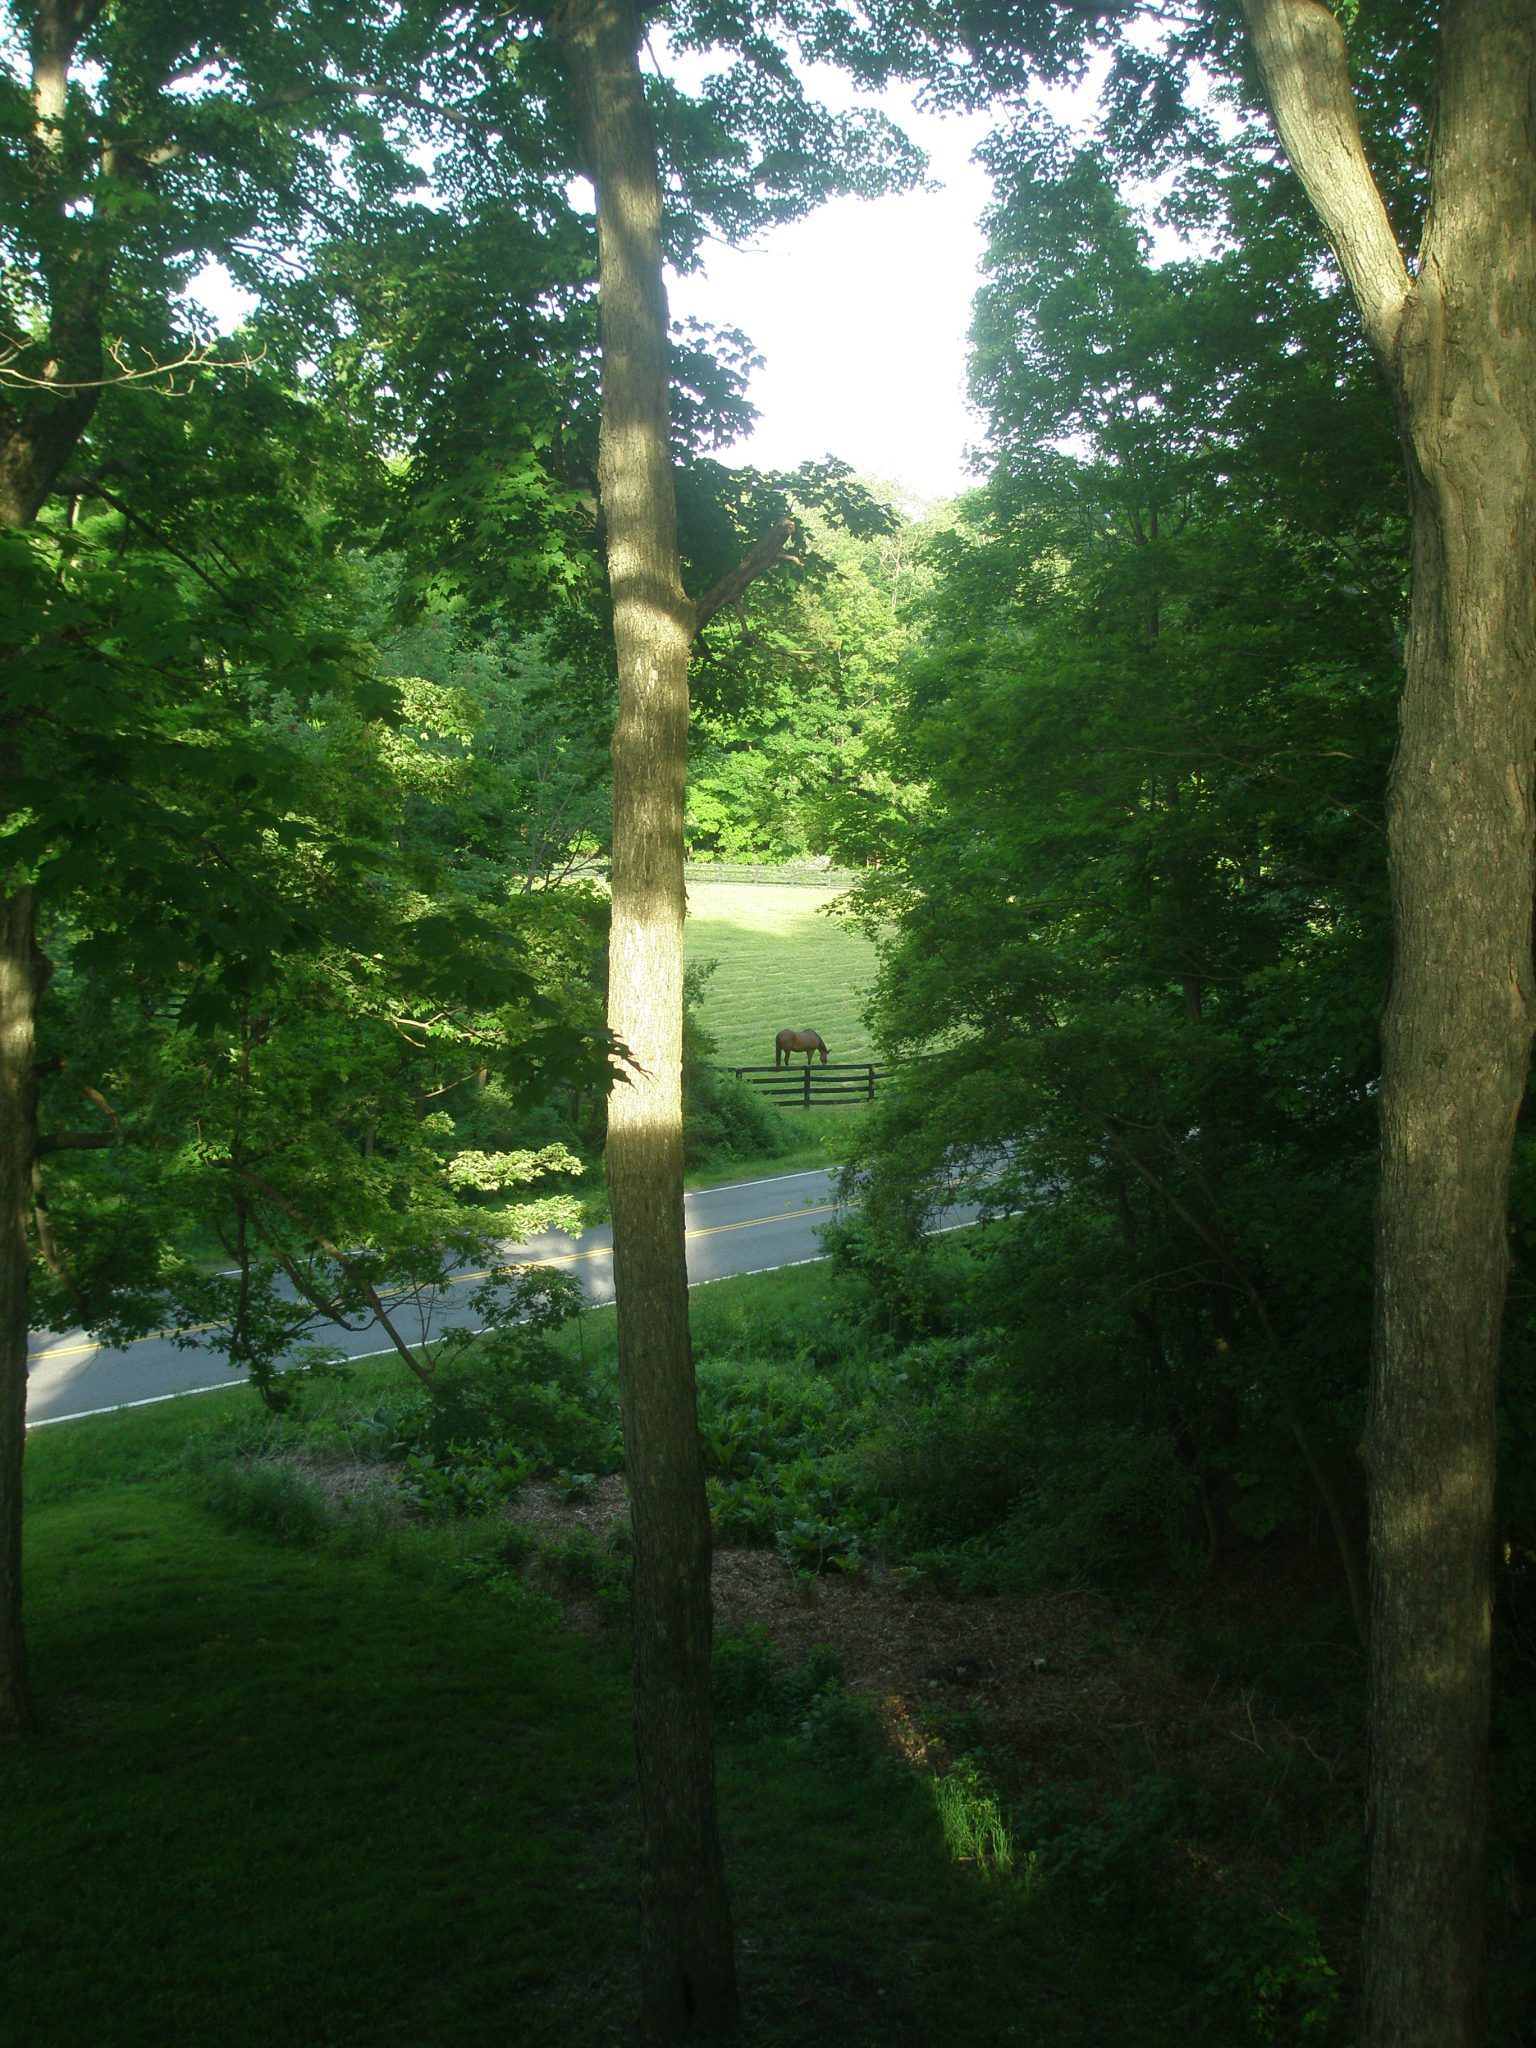 The view from my room at The Millbrook Inn on the morning of June 5, 2013